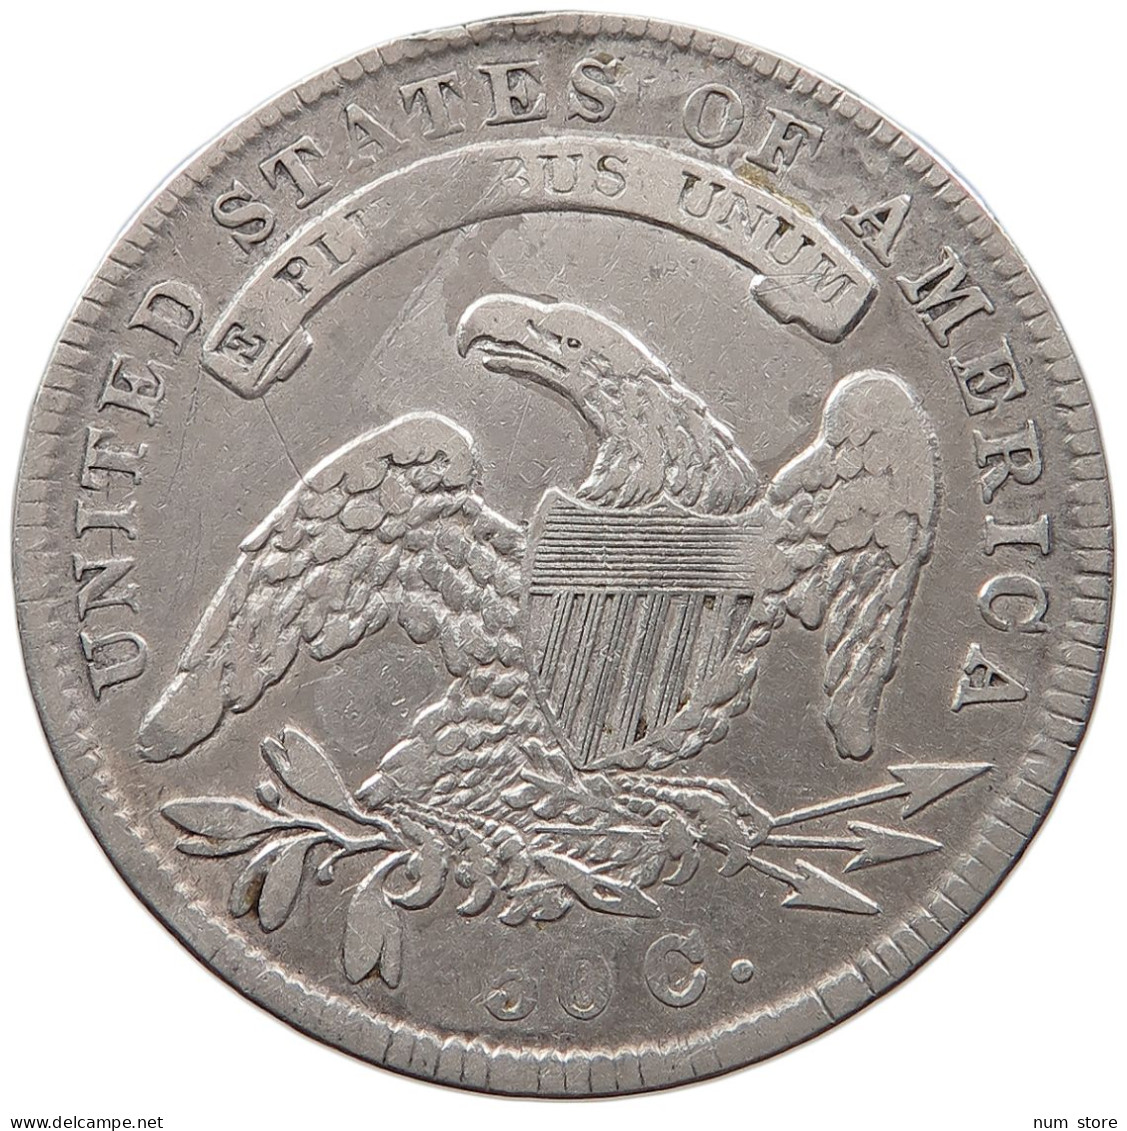 UNITED STATES OF AMERICA HALF DOLLAR 1834 CAPPED BUST #t141 0415 - 1794-1839: Early Halves (Prémices)